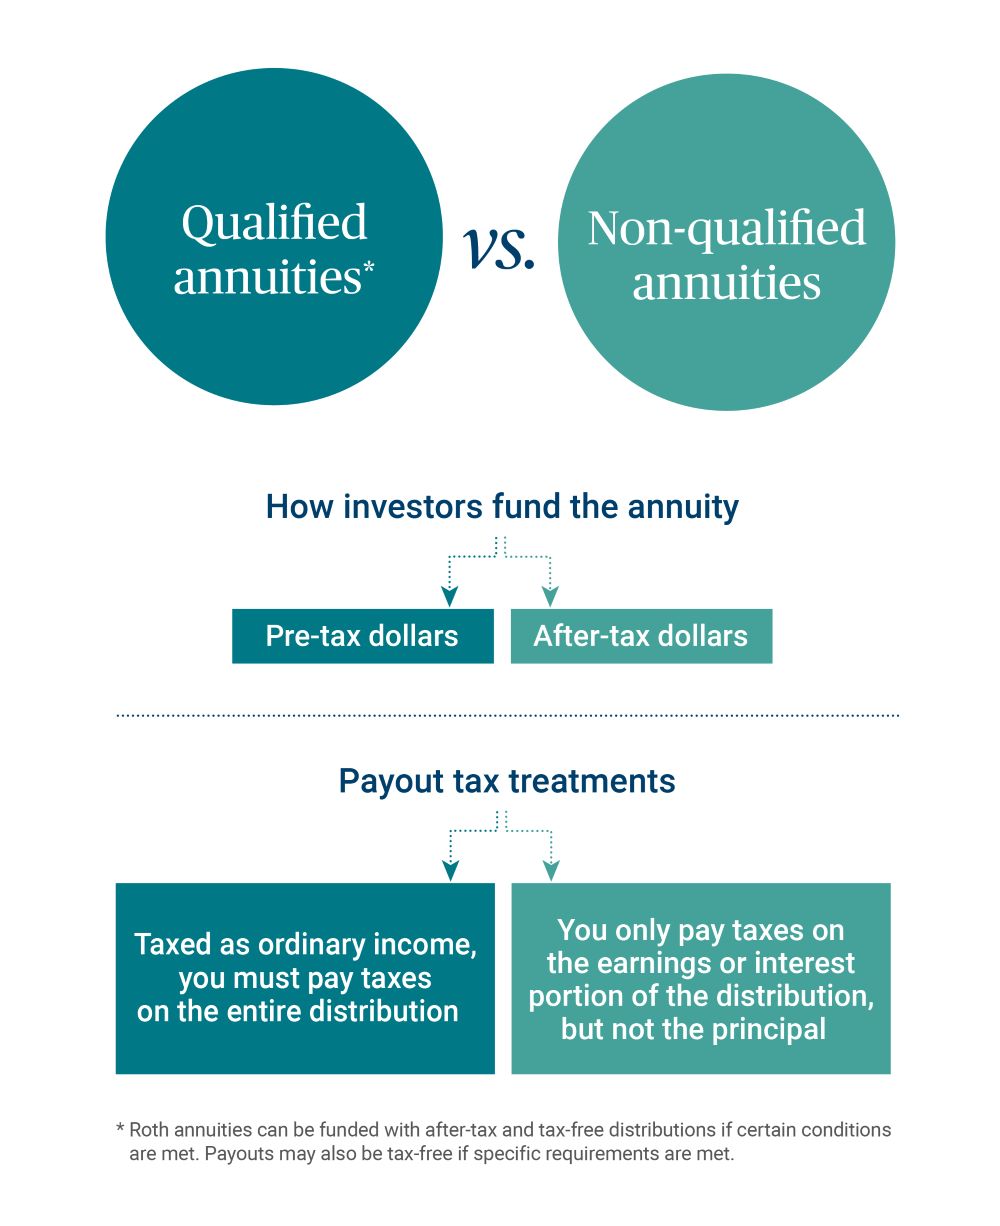 Qualified annuities vs. non-qualified annuities